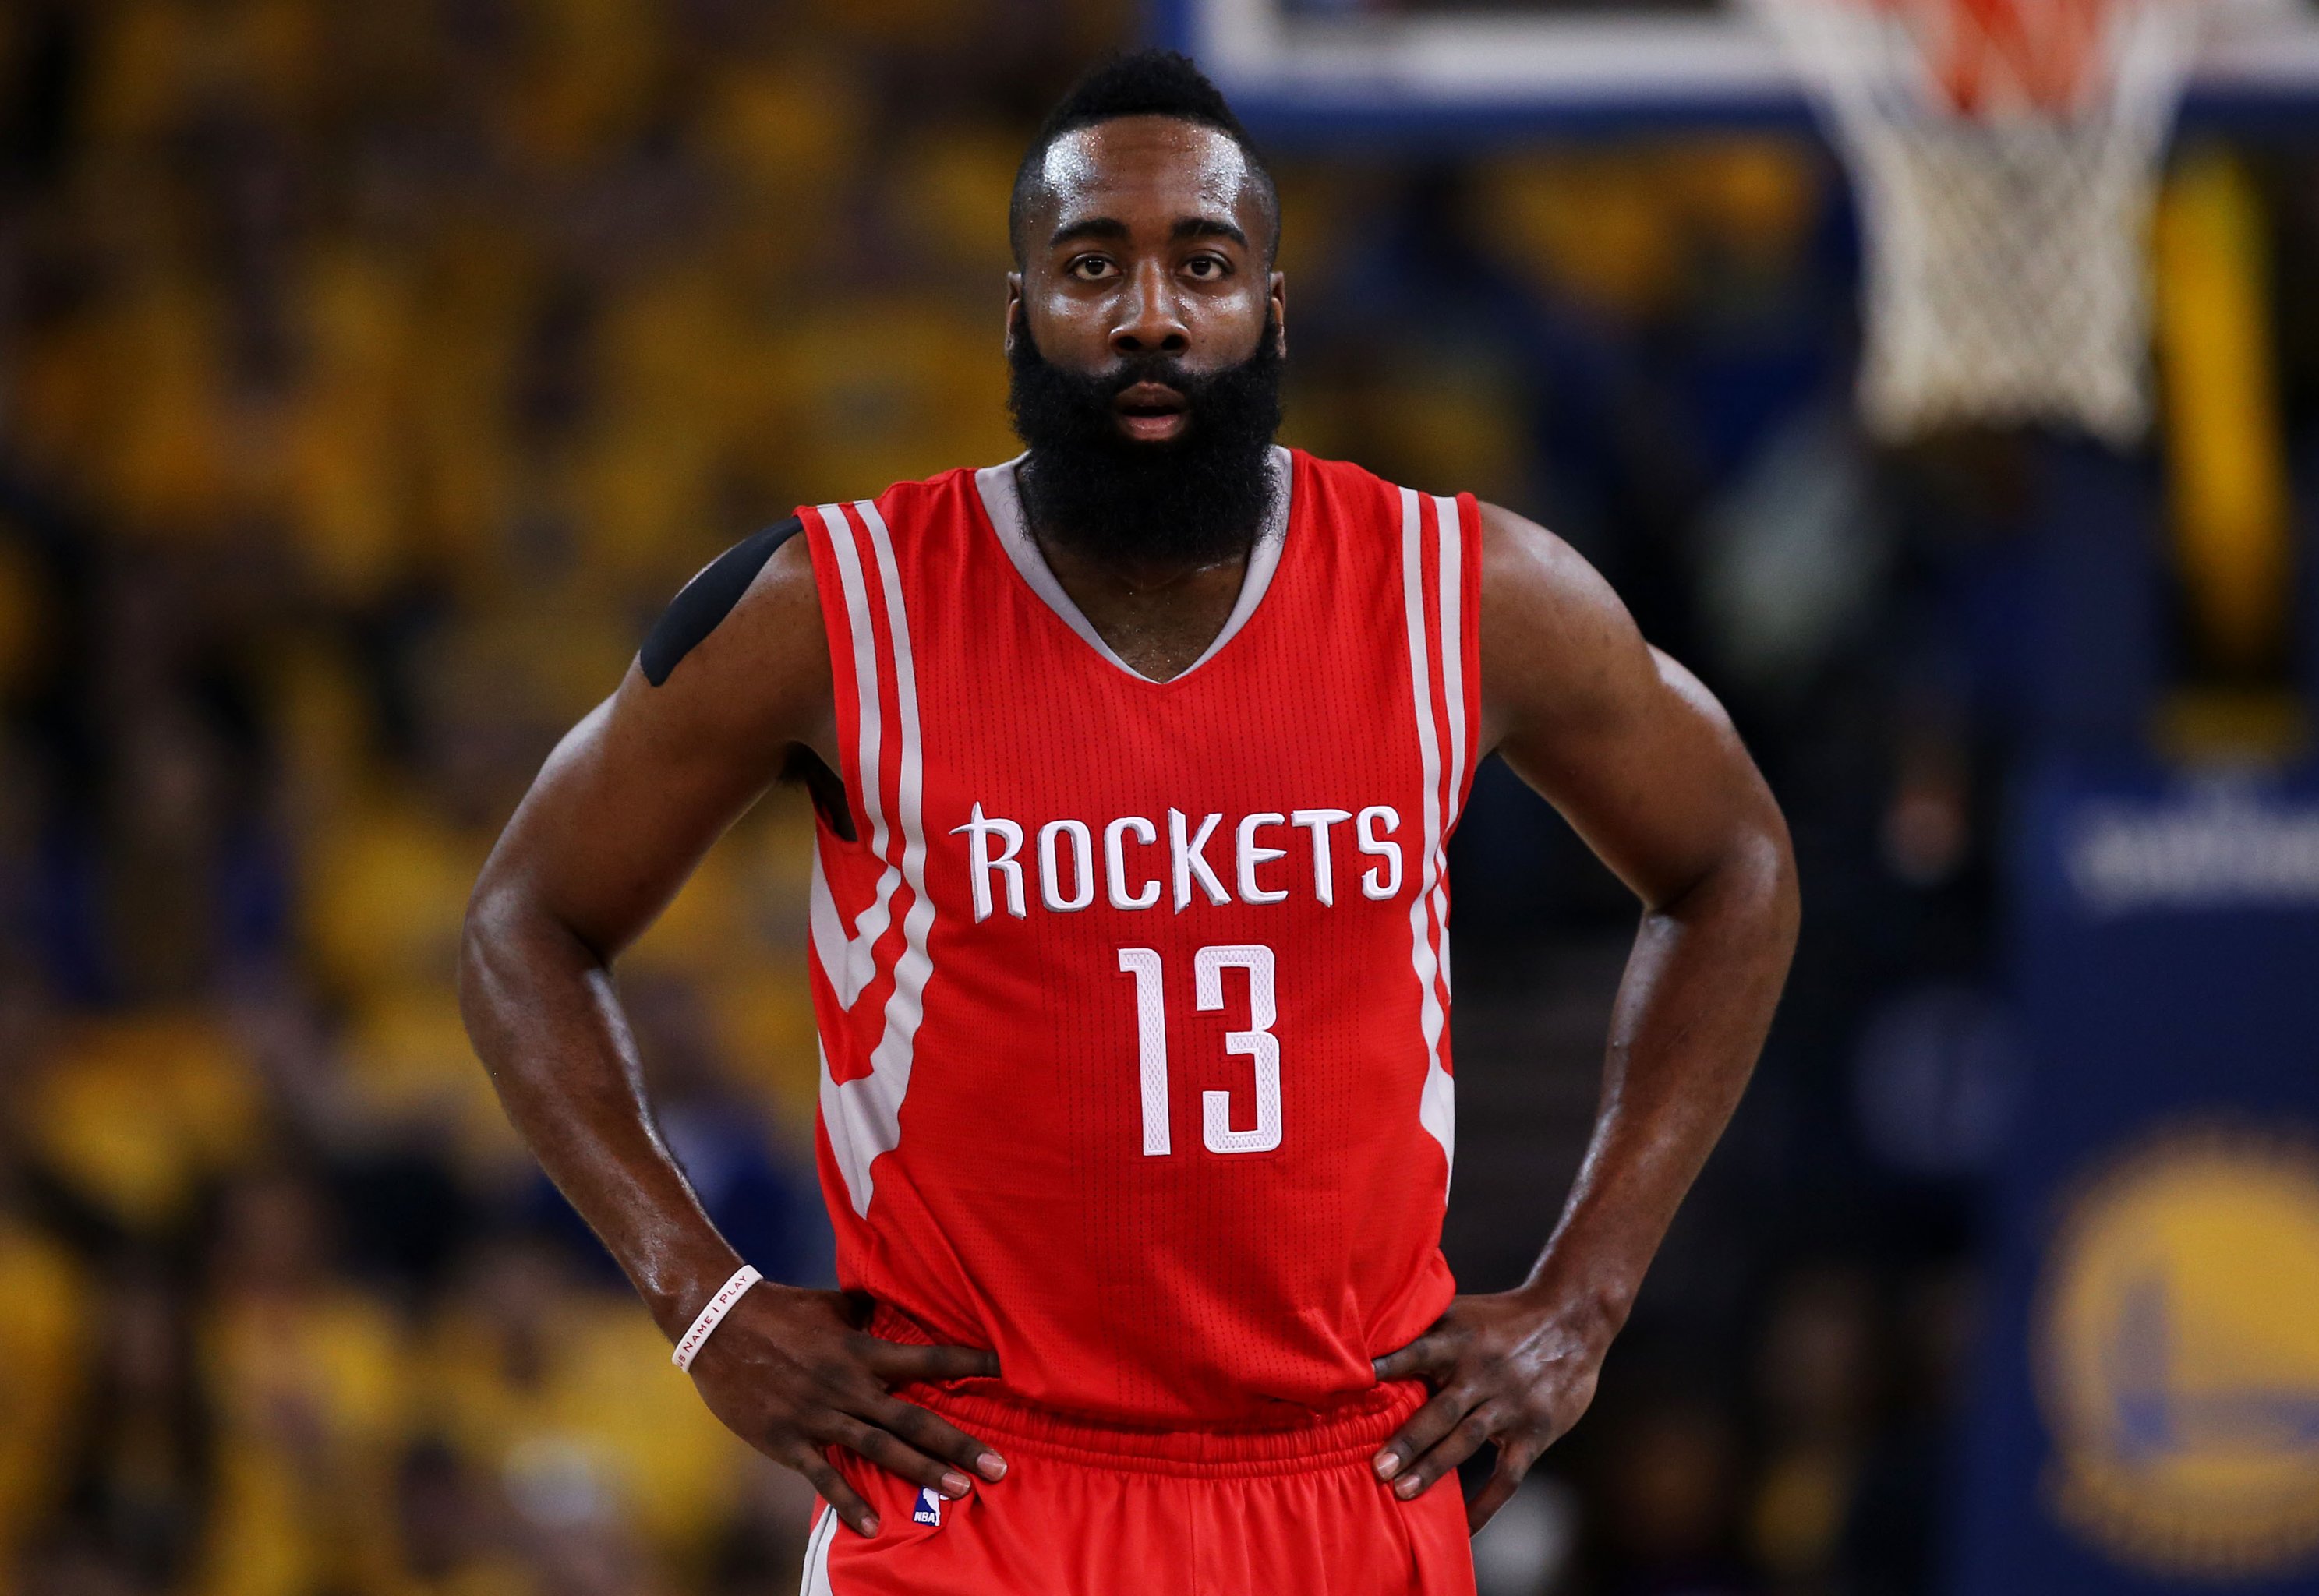 What's Cooking The Cheft James Harden shirt